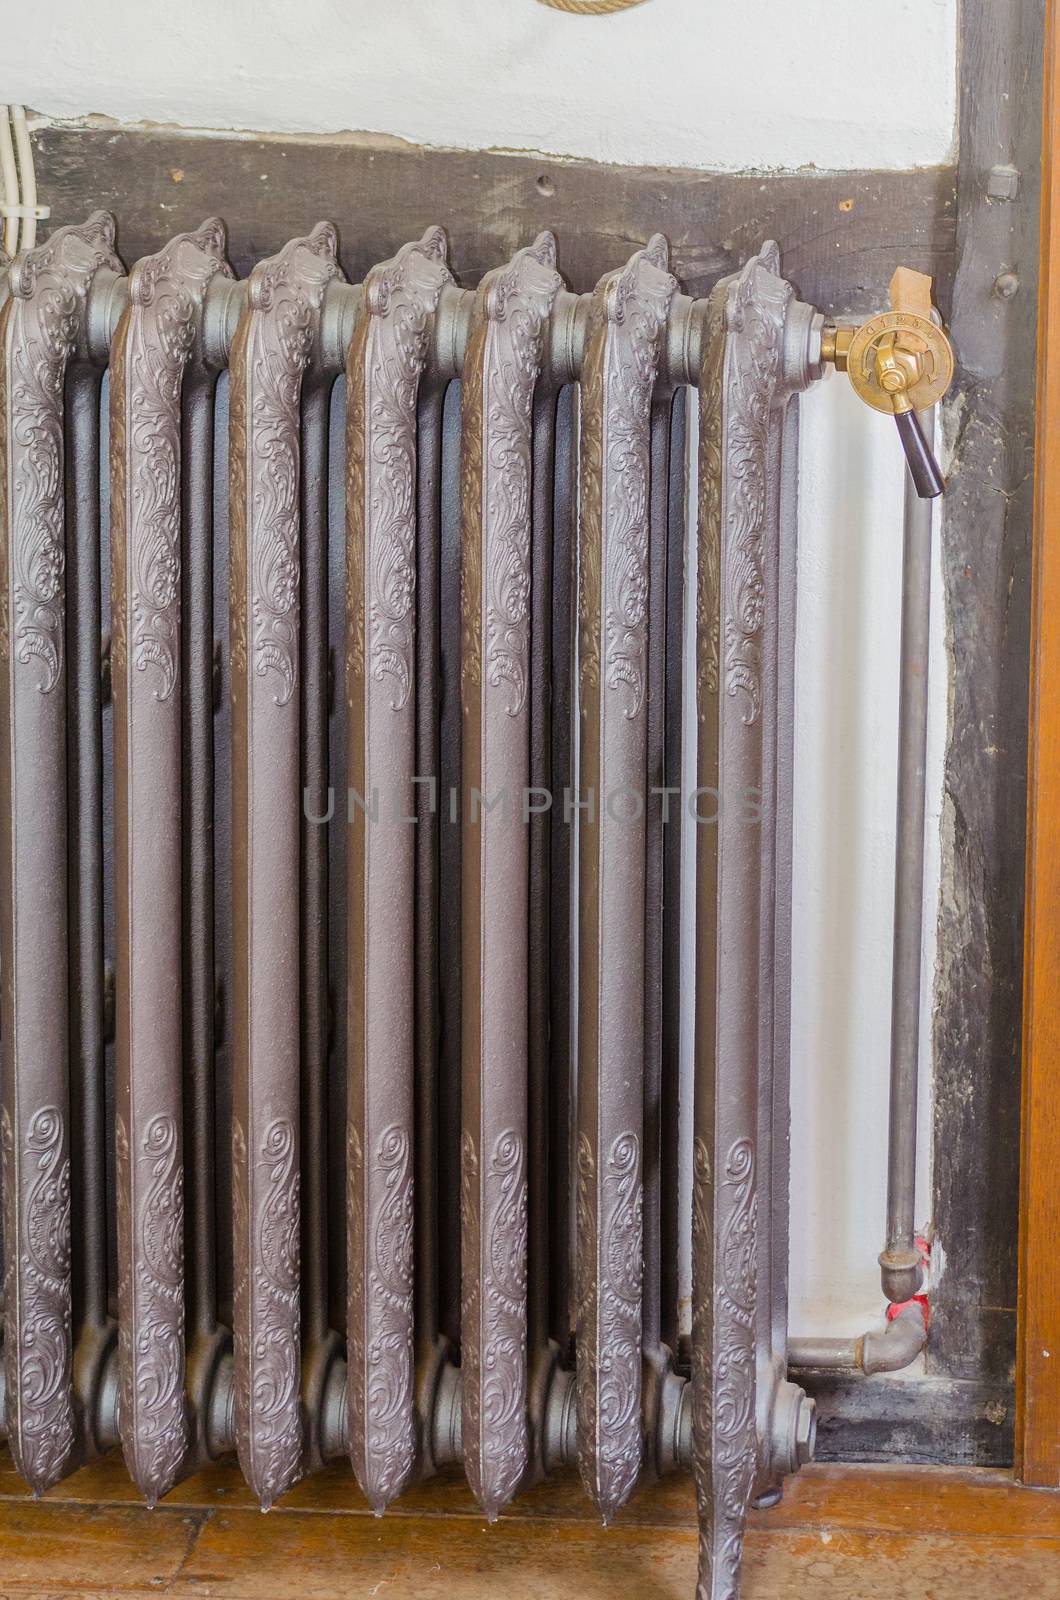 An antique vintage radiator of a central heating system